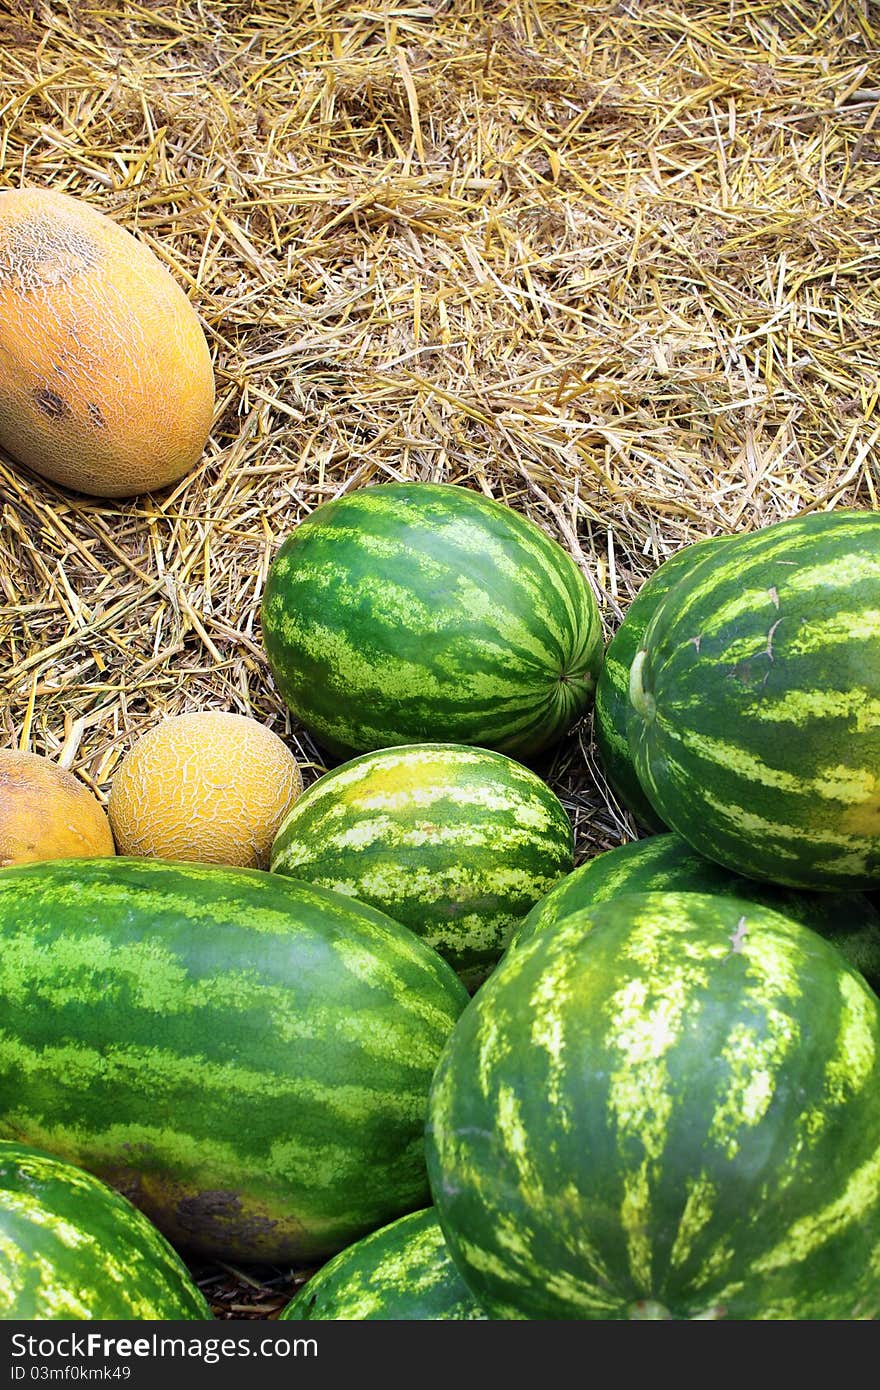 Watermelon and cantaloupe in hay